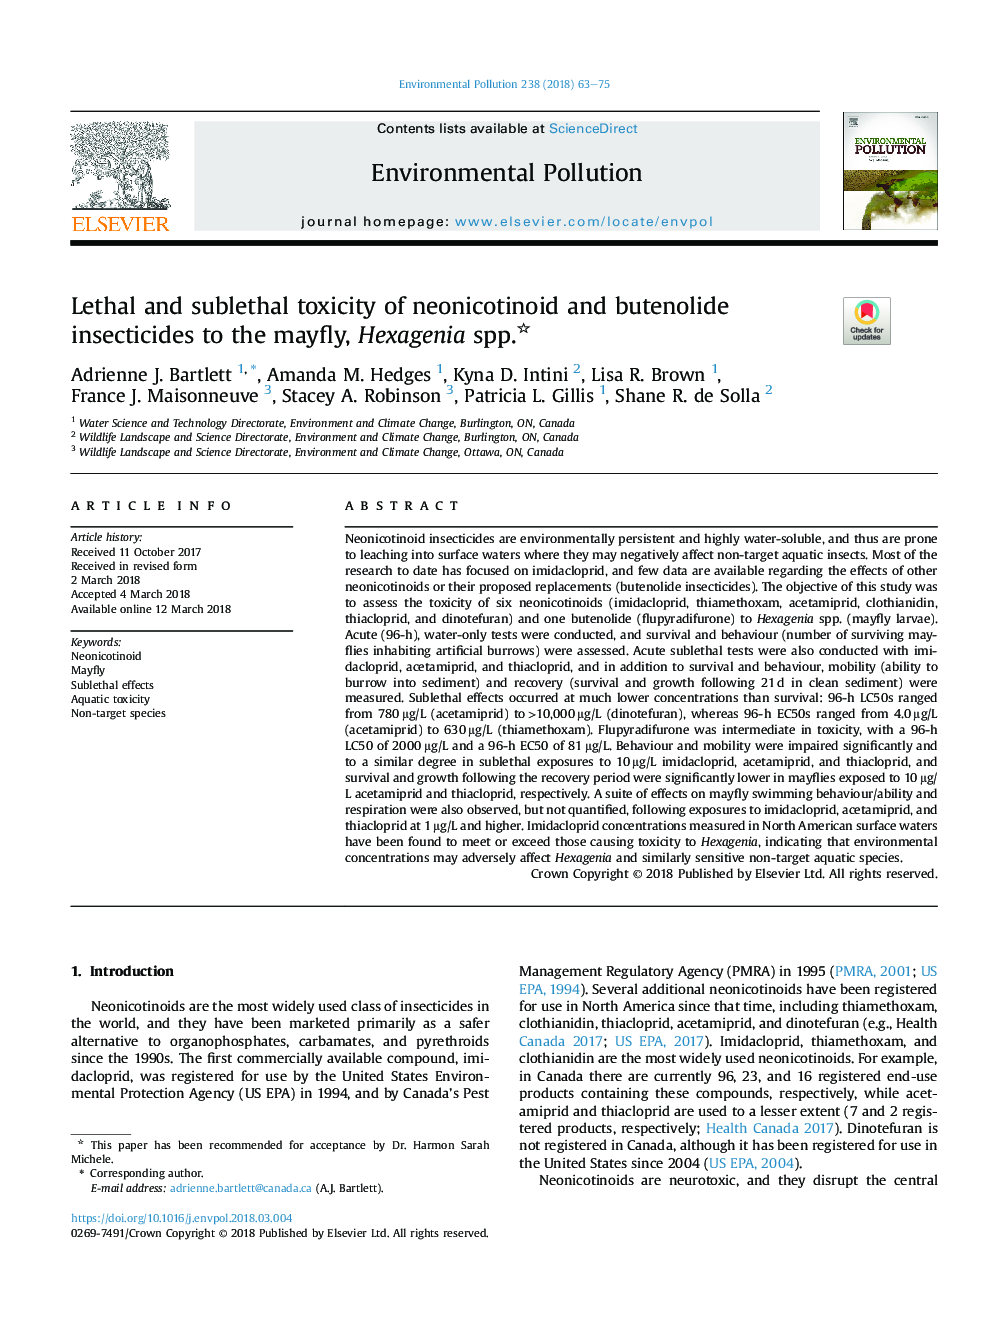 Lethal and sublethal toxicity of neonicotinoid and butenolide insecticides to the mayfly, Hexagenia spp.